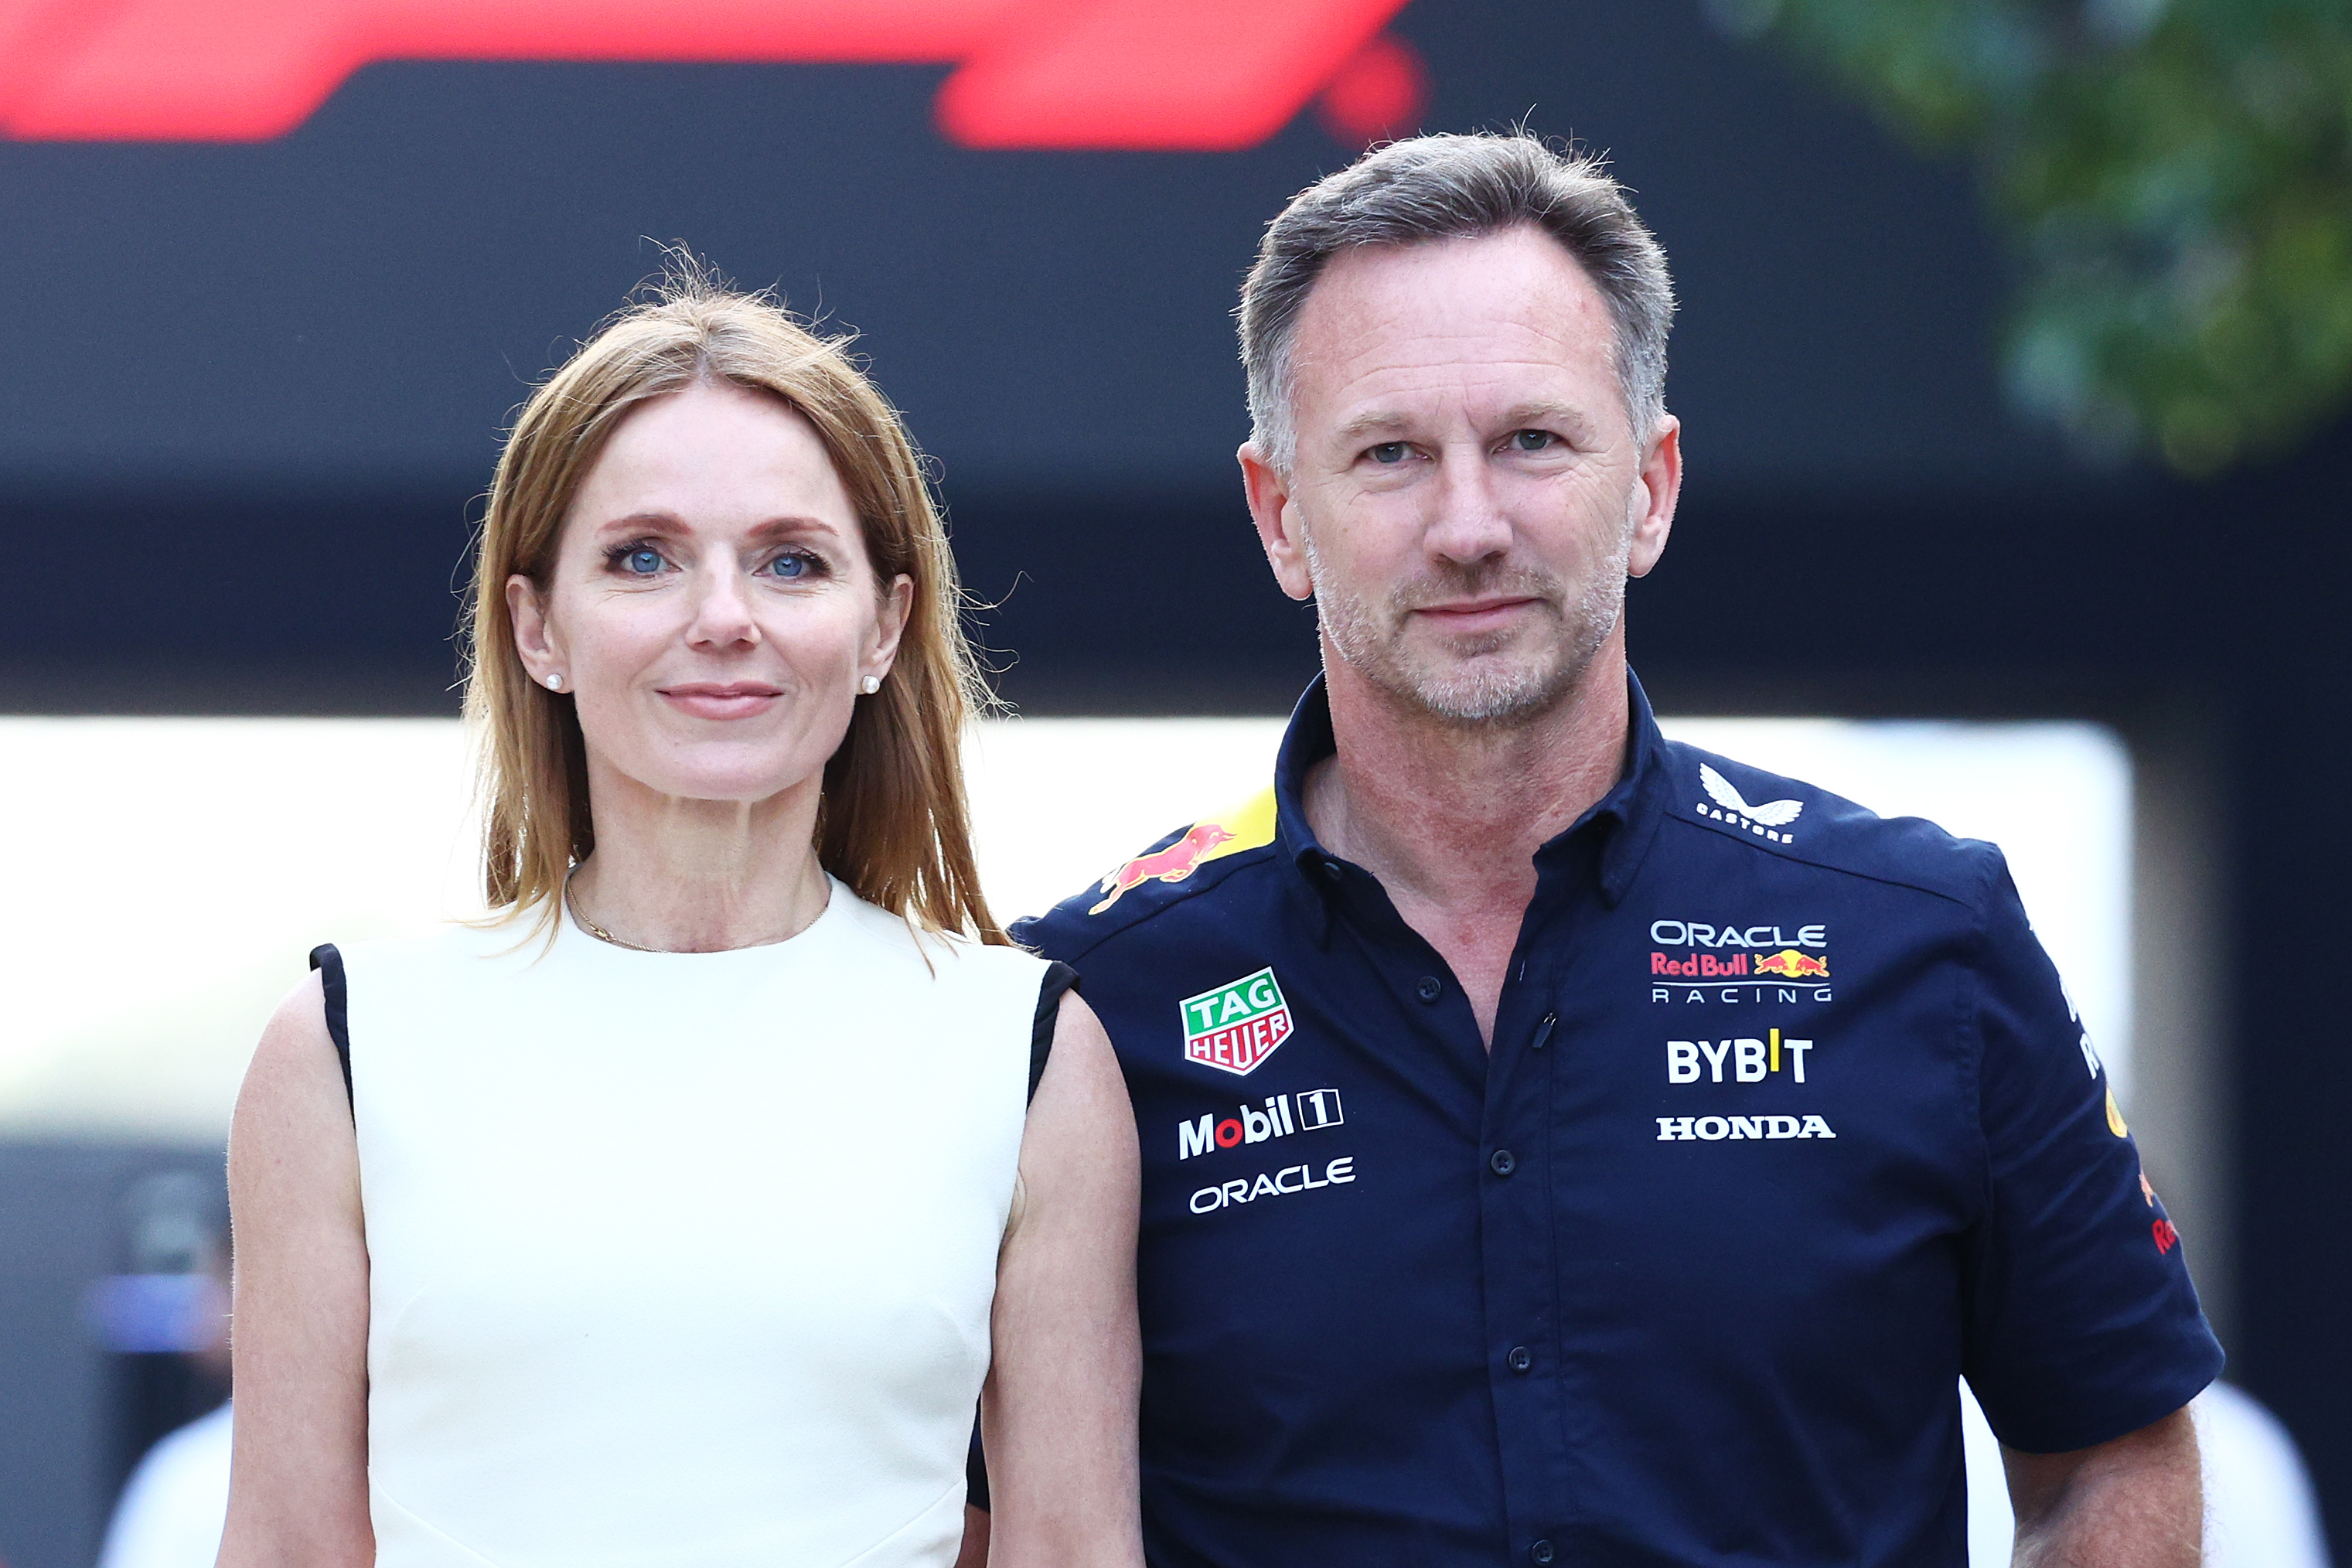 Geri with husband Horner - whose seedy messages were leaked online